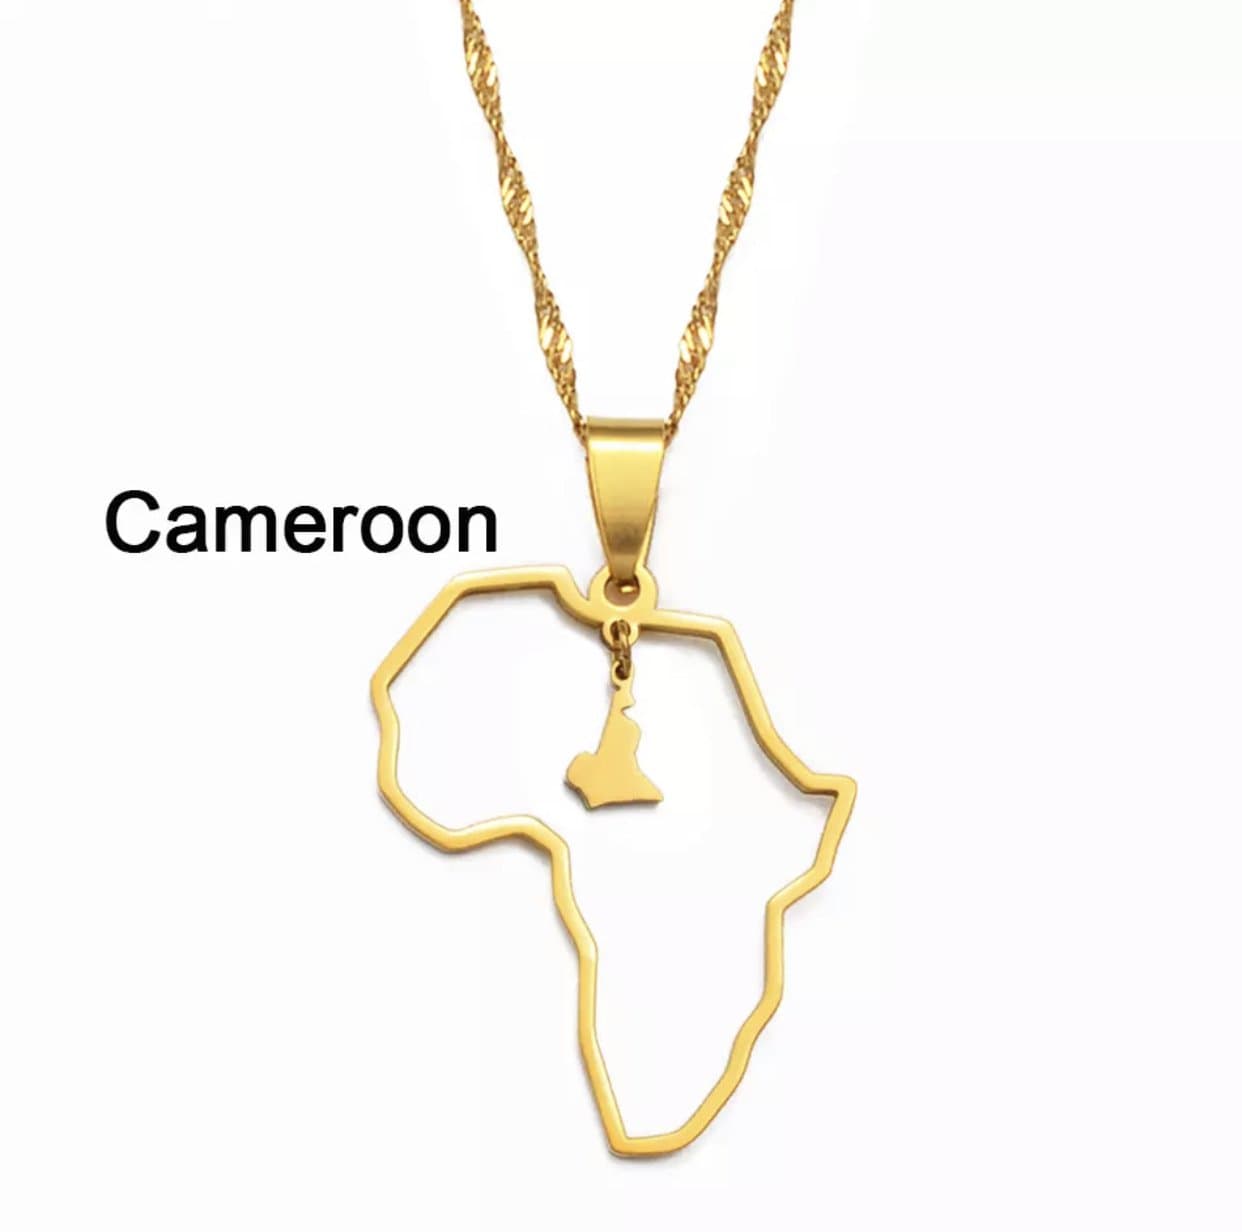 Veryldesigns Necklace Cameroon Custom African country Necklace